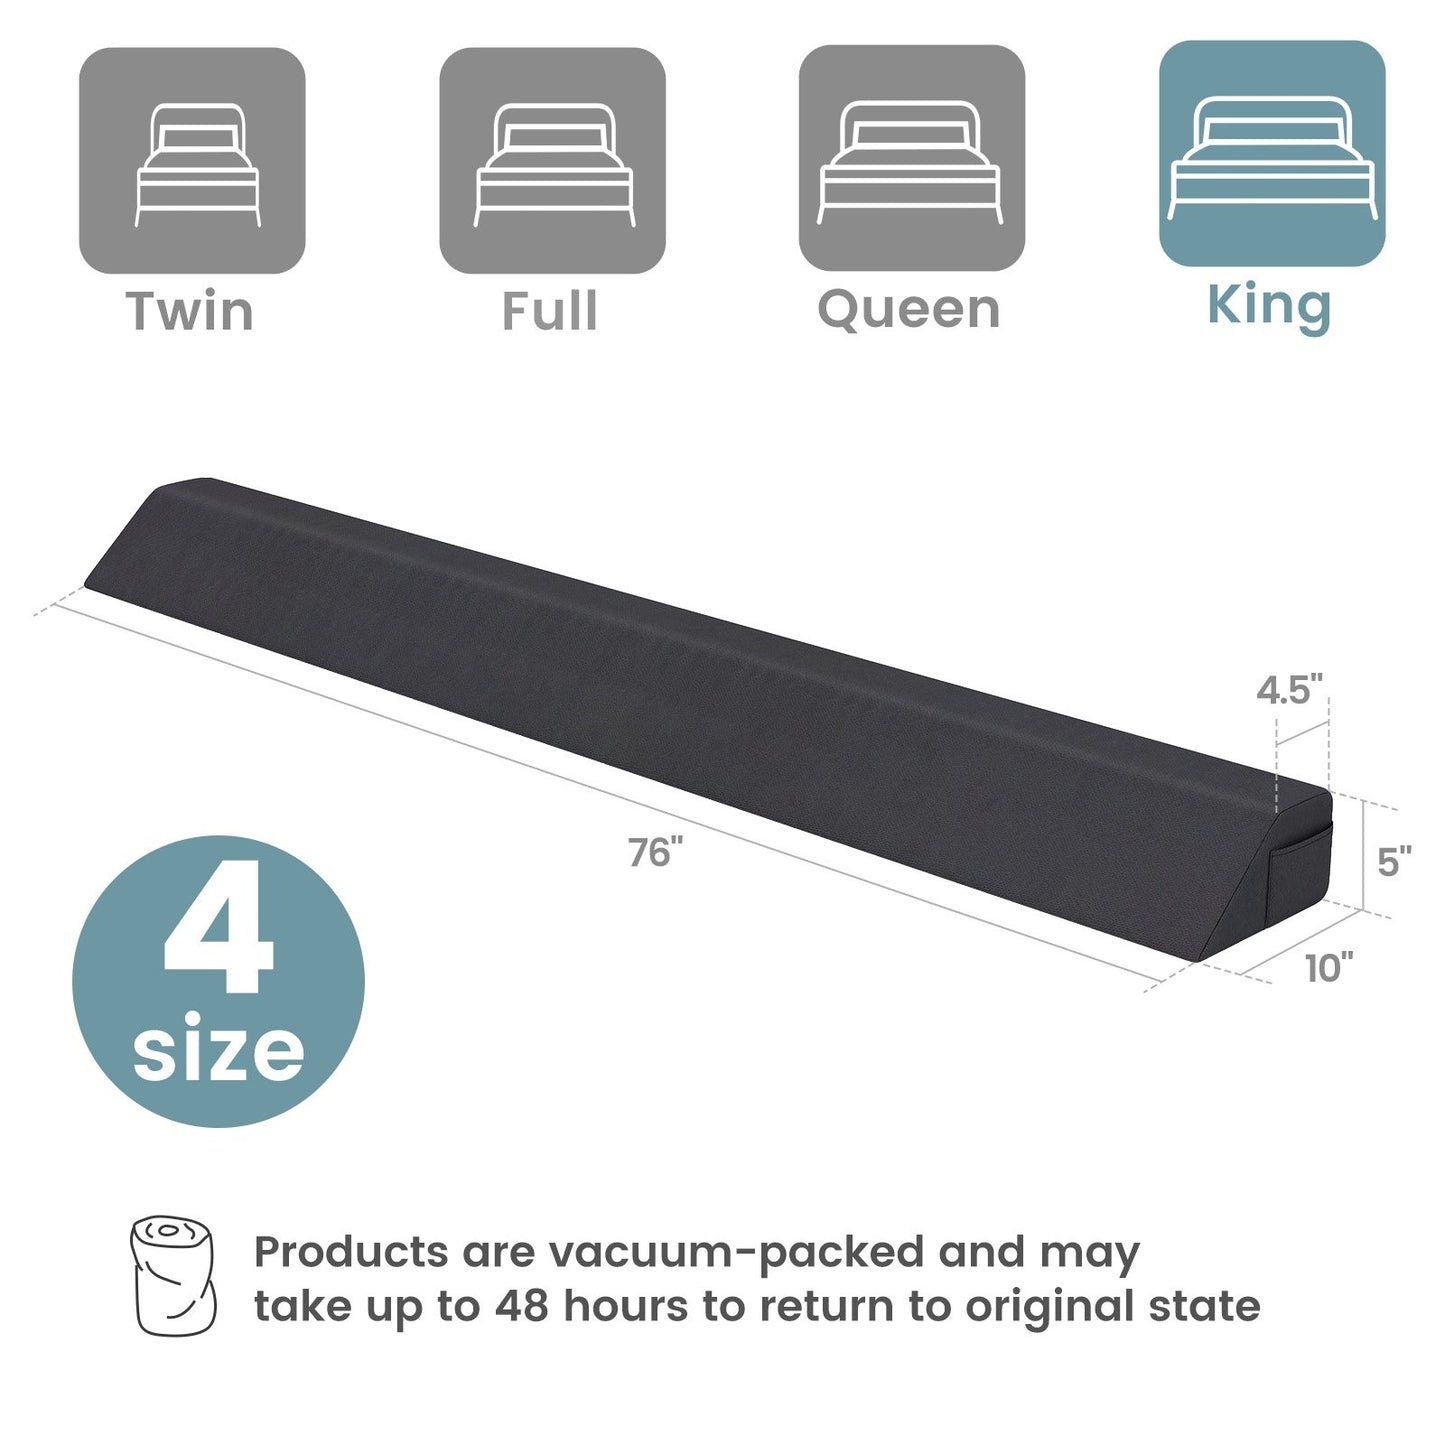 Bed Wedge Pillow with Storage Bag-King Size, Gray